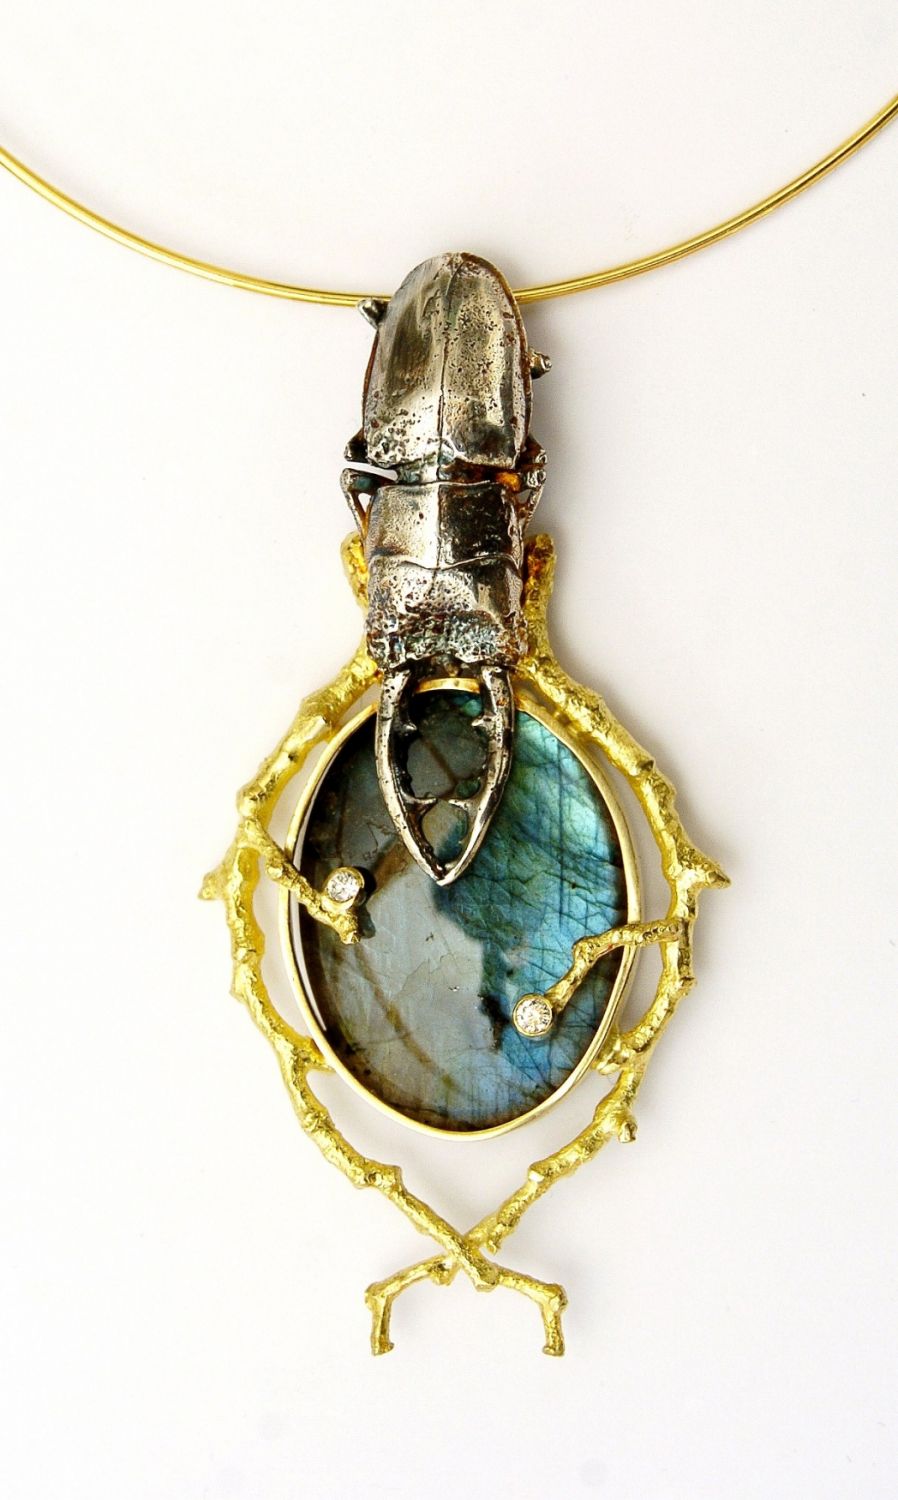 Stag Beetle with Labradorite.